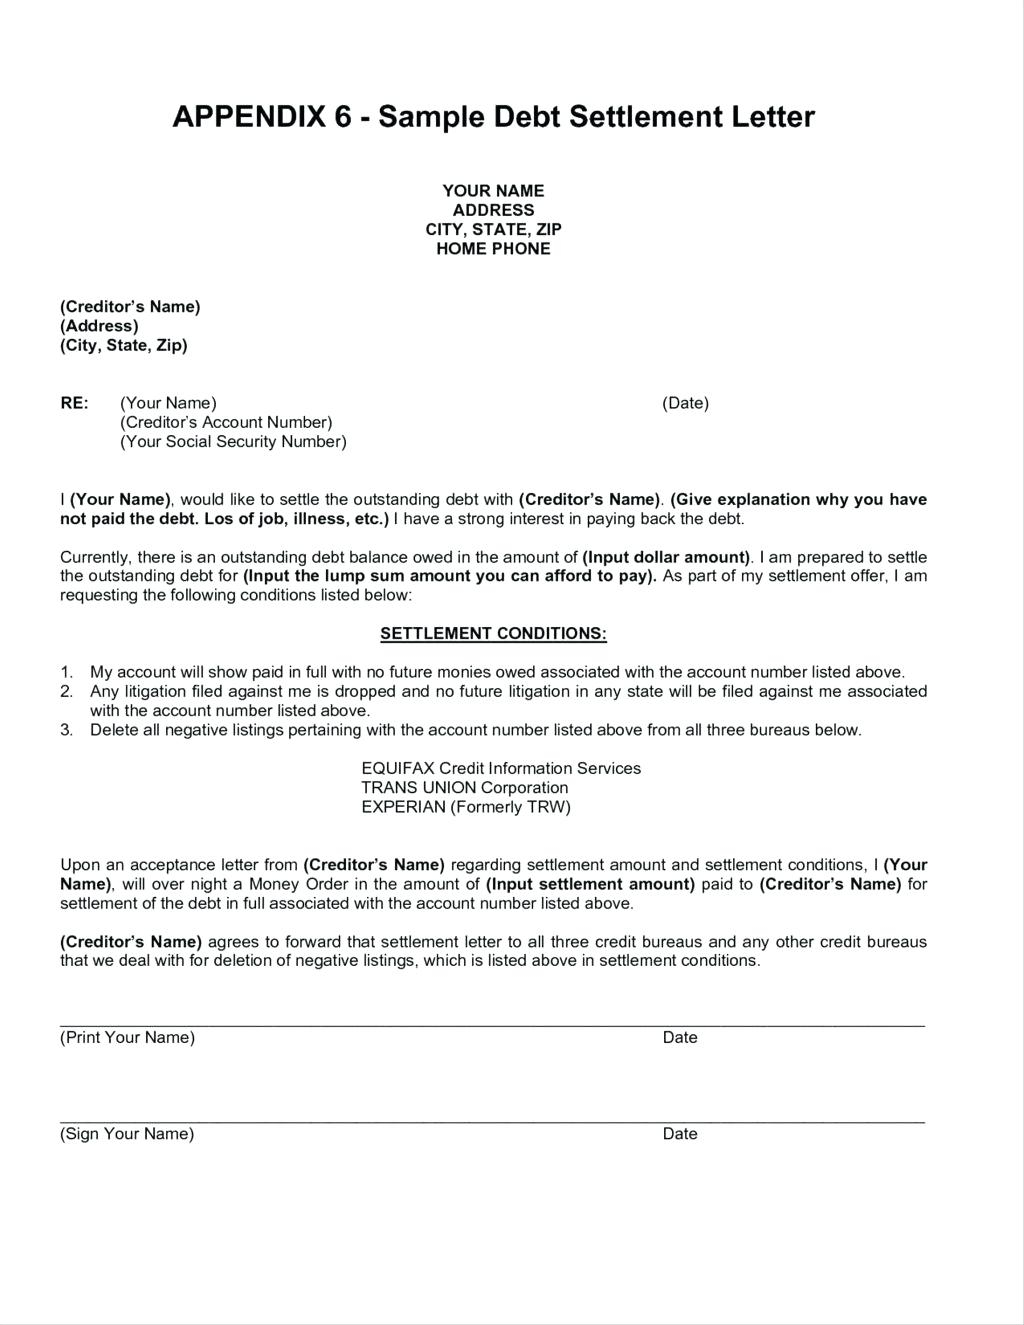 Full and Final Settlement Letter Template Car Accident ...